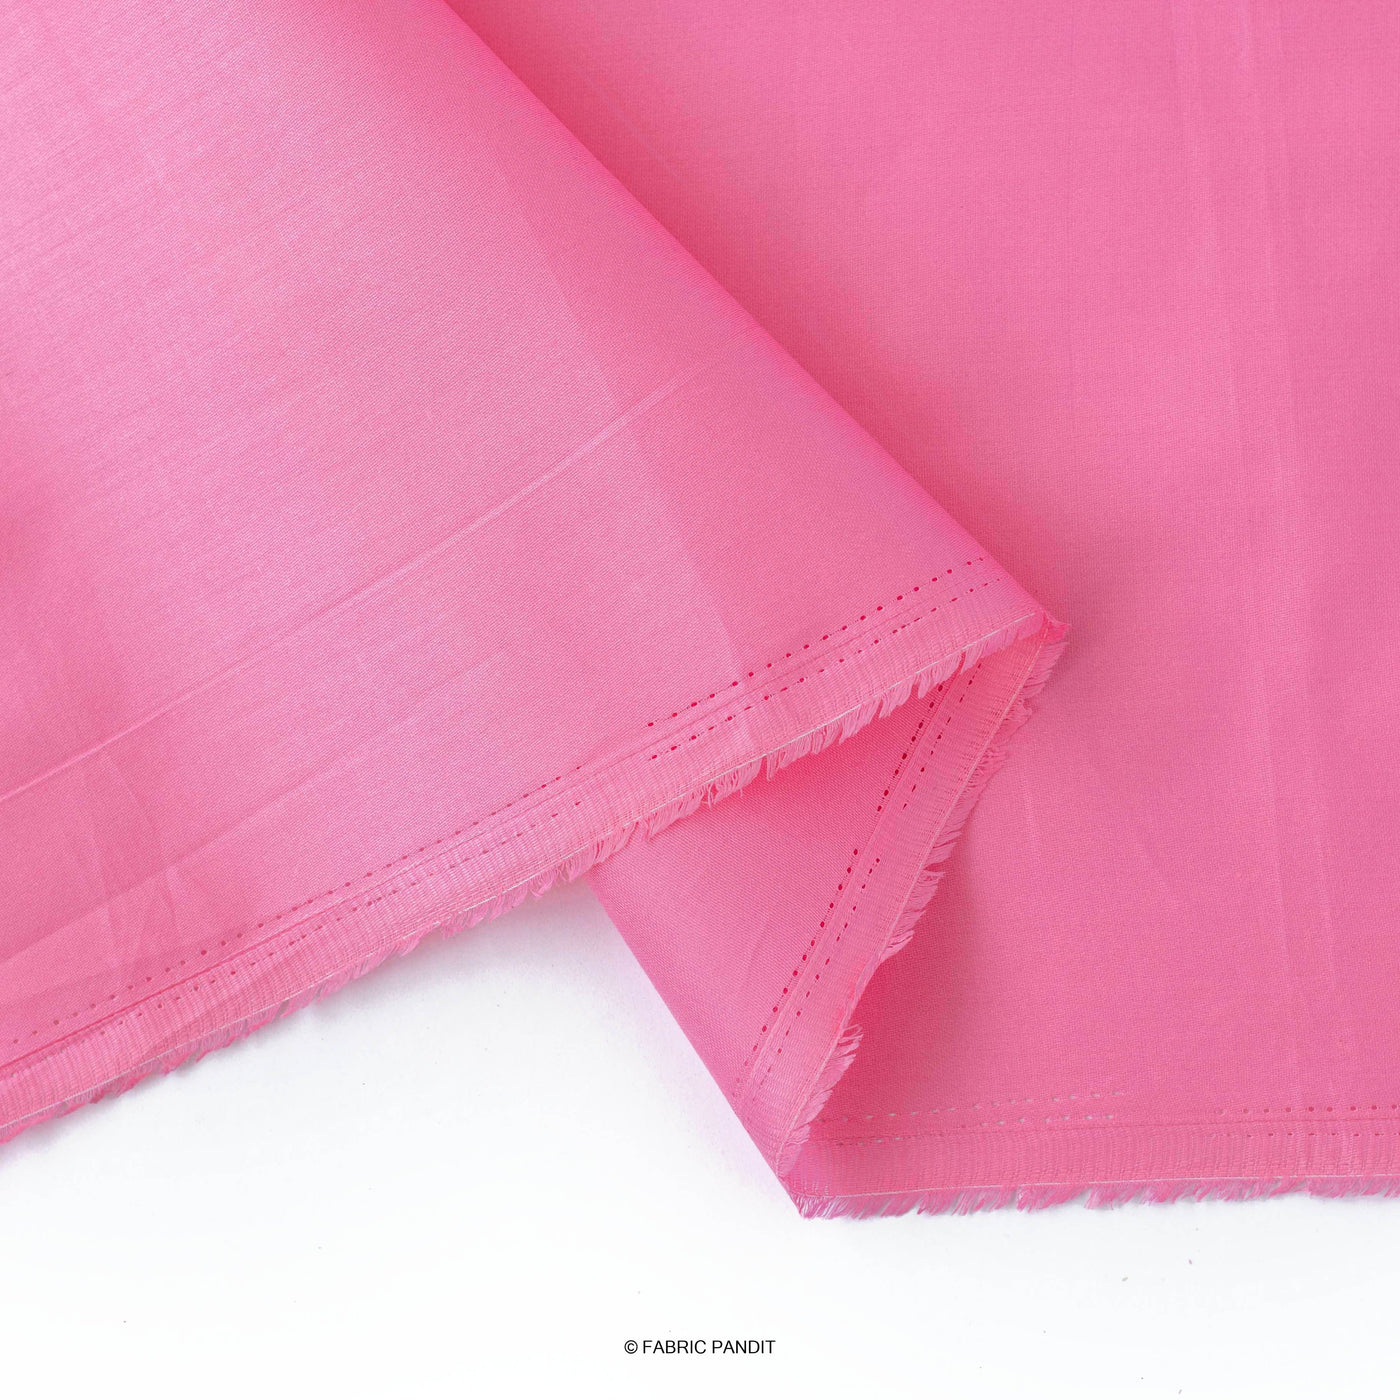 Fabric Pandit Fabric Candy Floss Pink Color Plain Cotton Satin Fabric (Width 42 Inches)